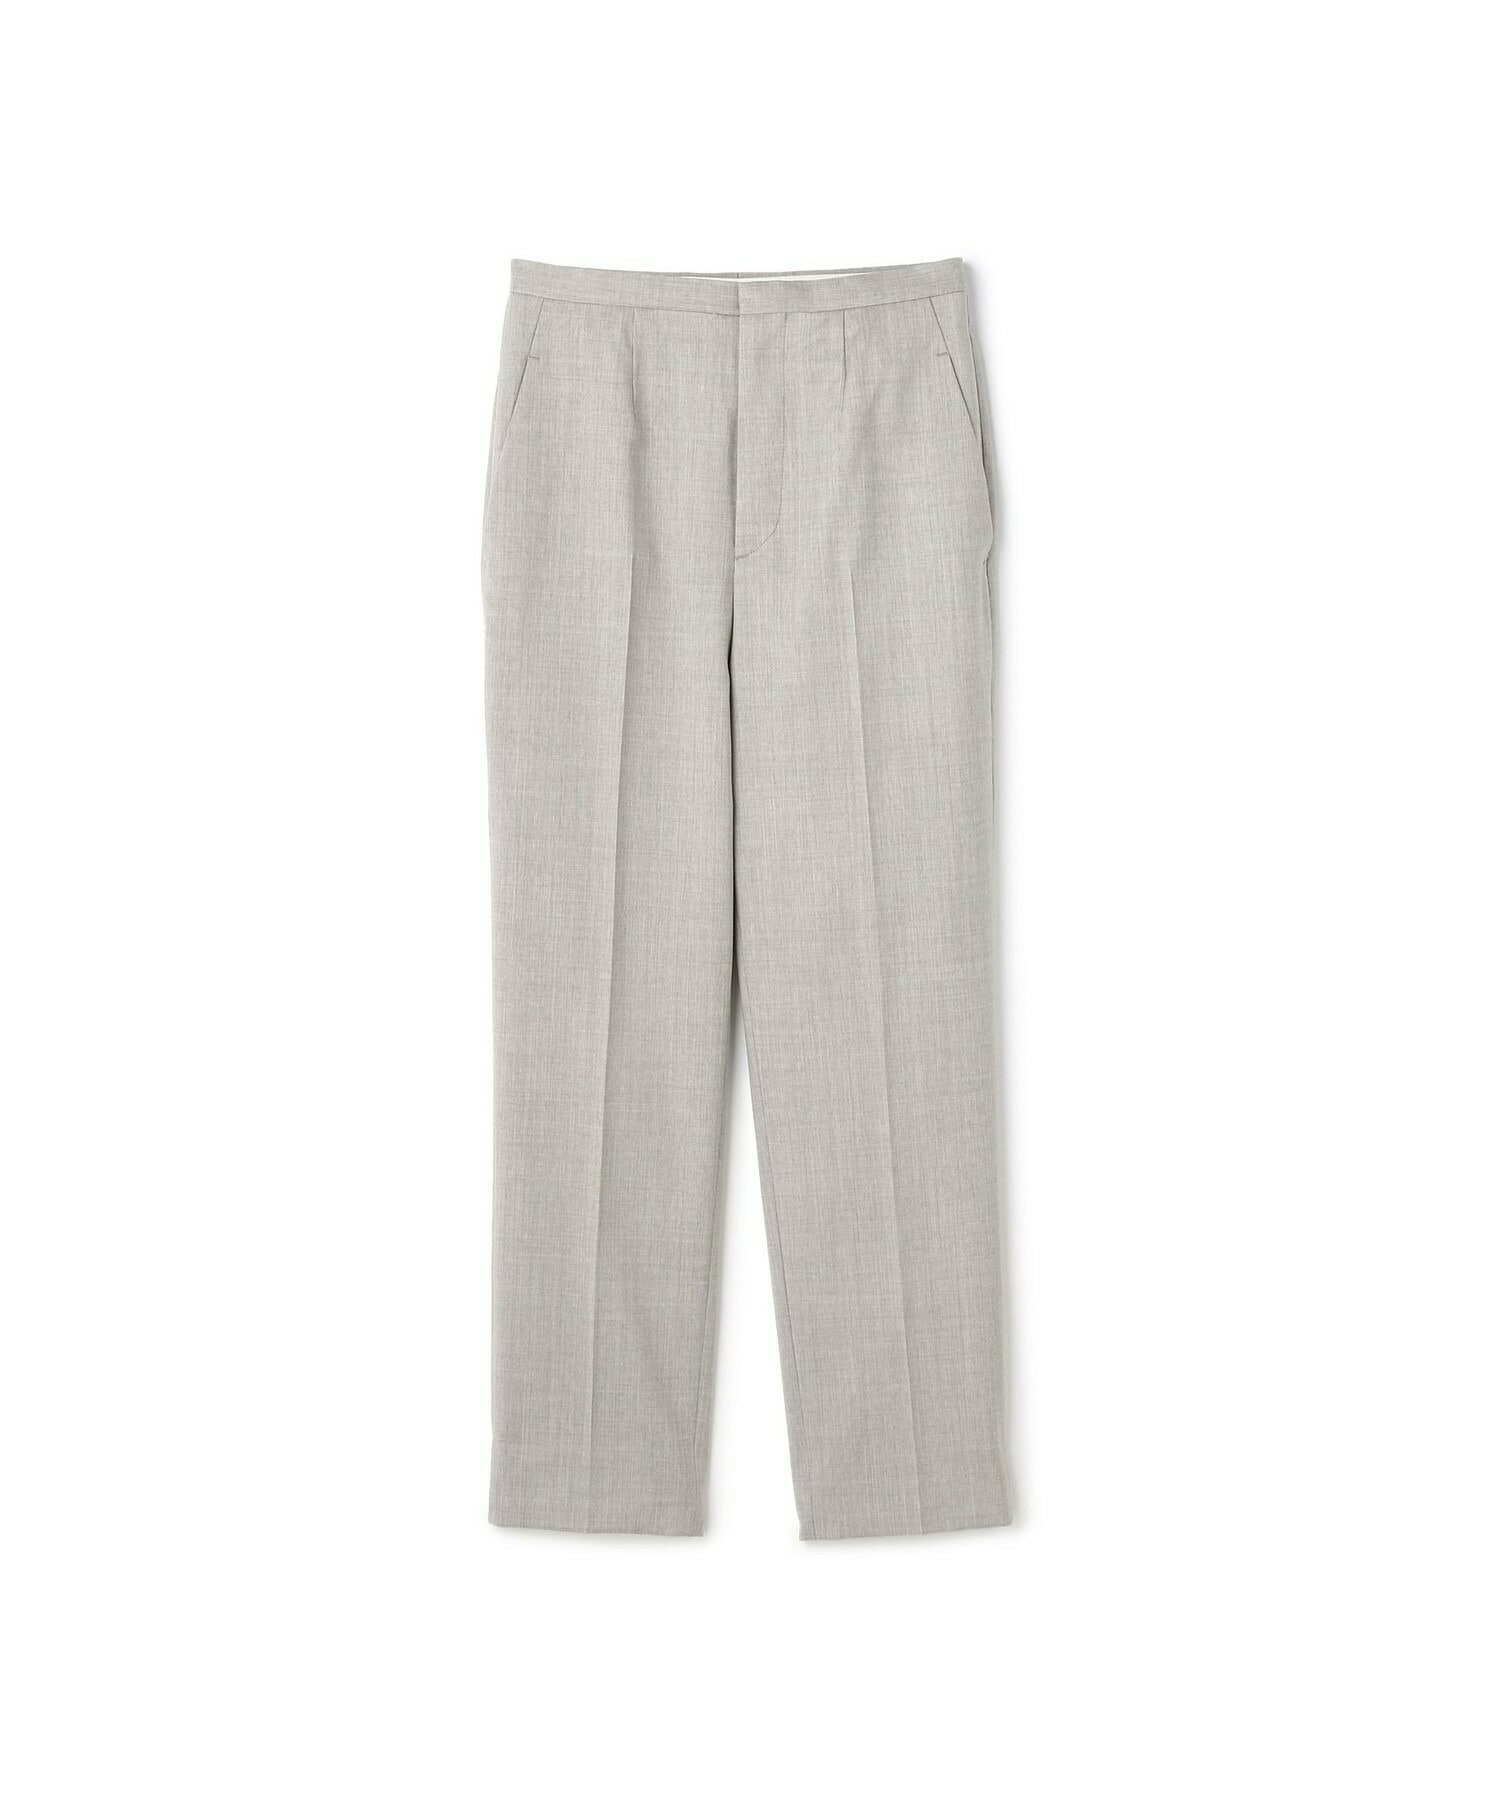 【yoshie inaba】STRETCH WOOL CIGARETTE PANTS 詳細画像 ライトグレー 1